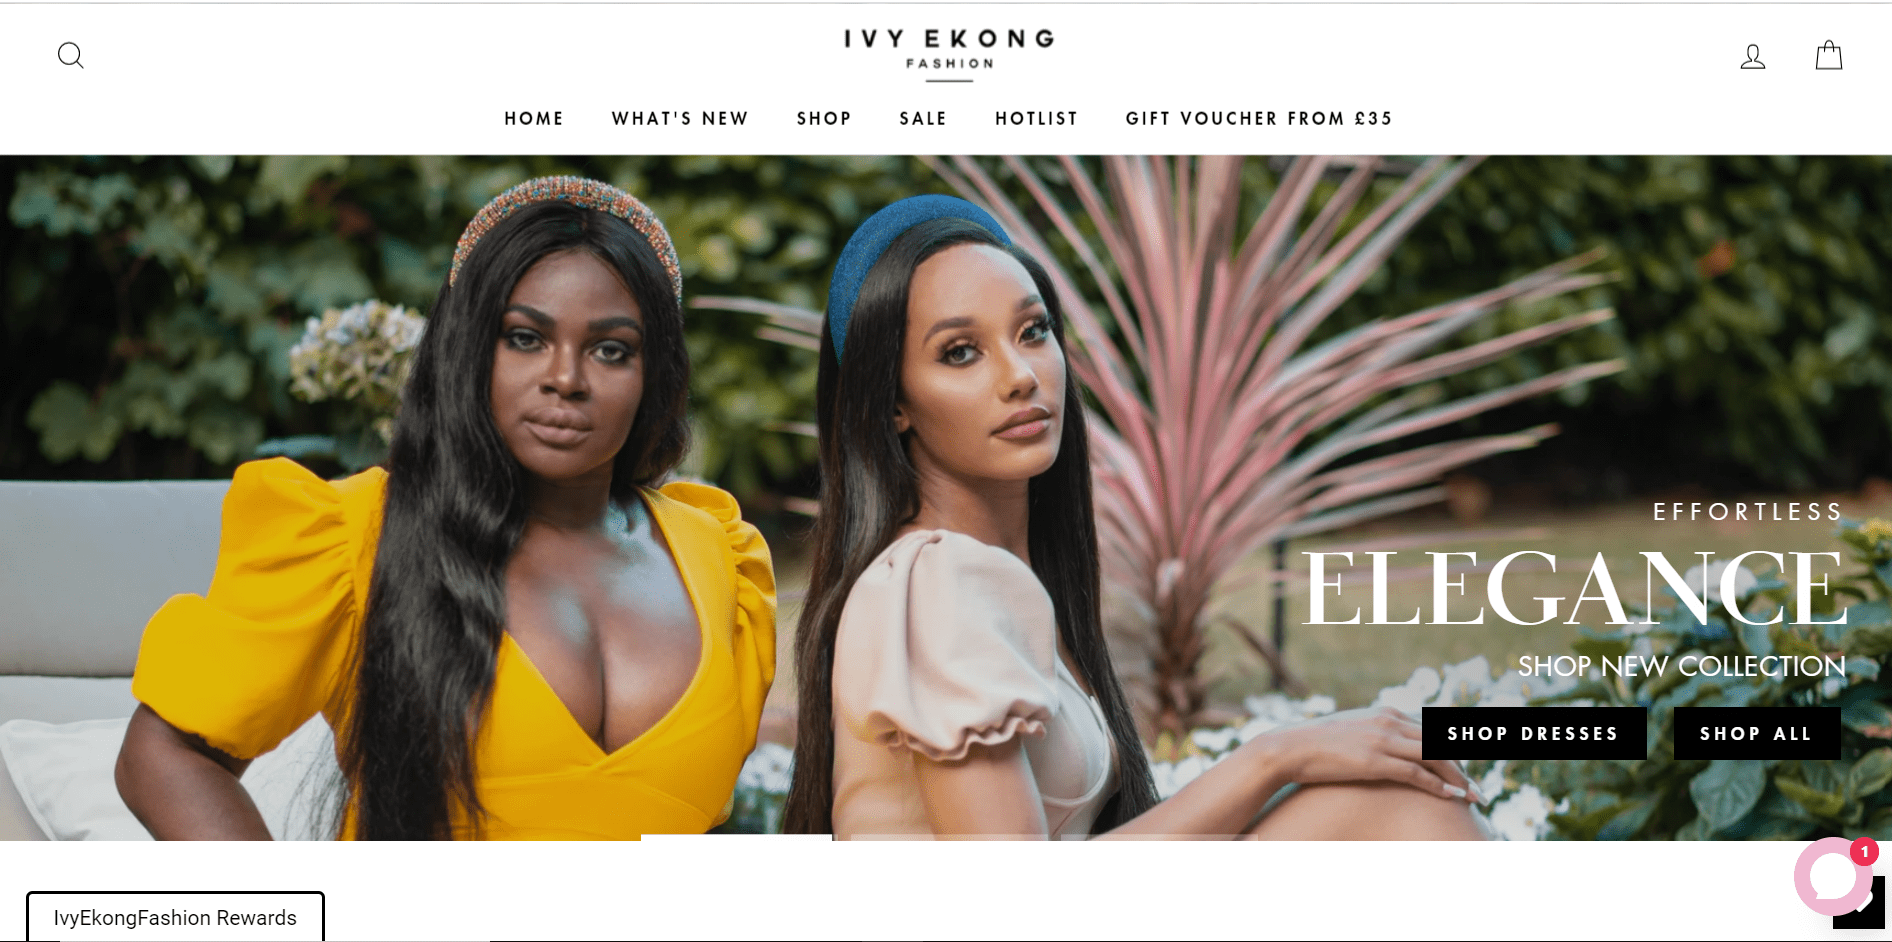 Ivy Ekong fashion generates more sales with 28% less ad spends using our user intent level targeting efforts